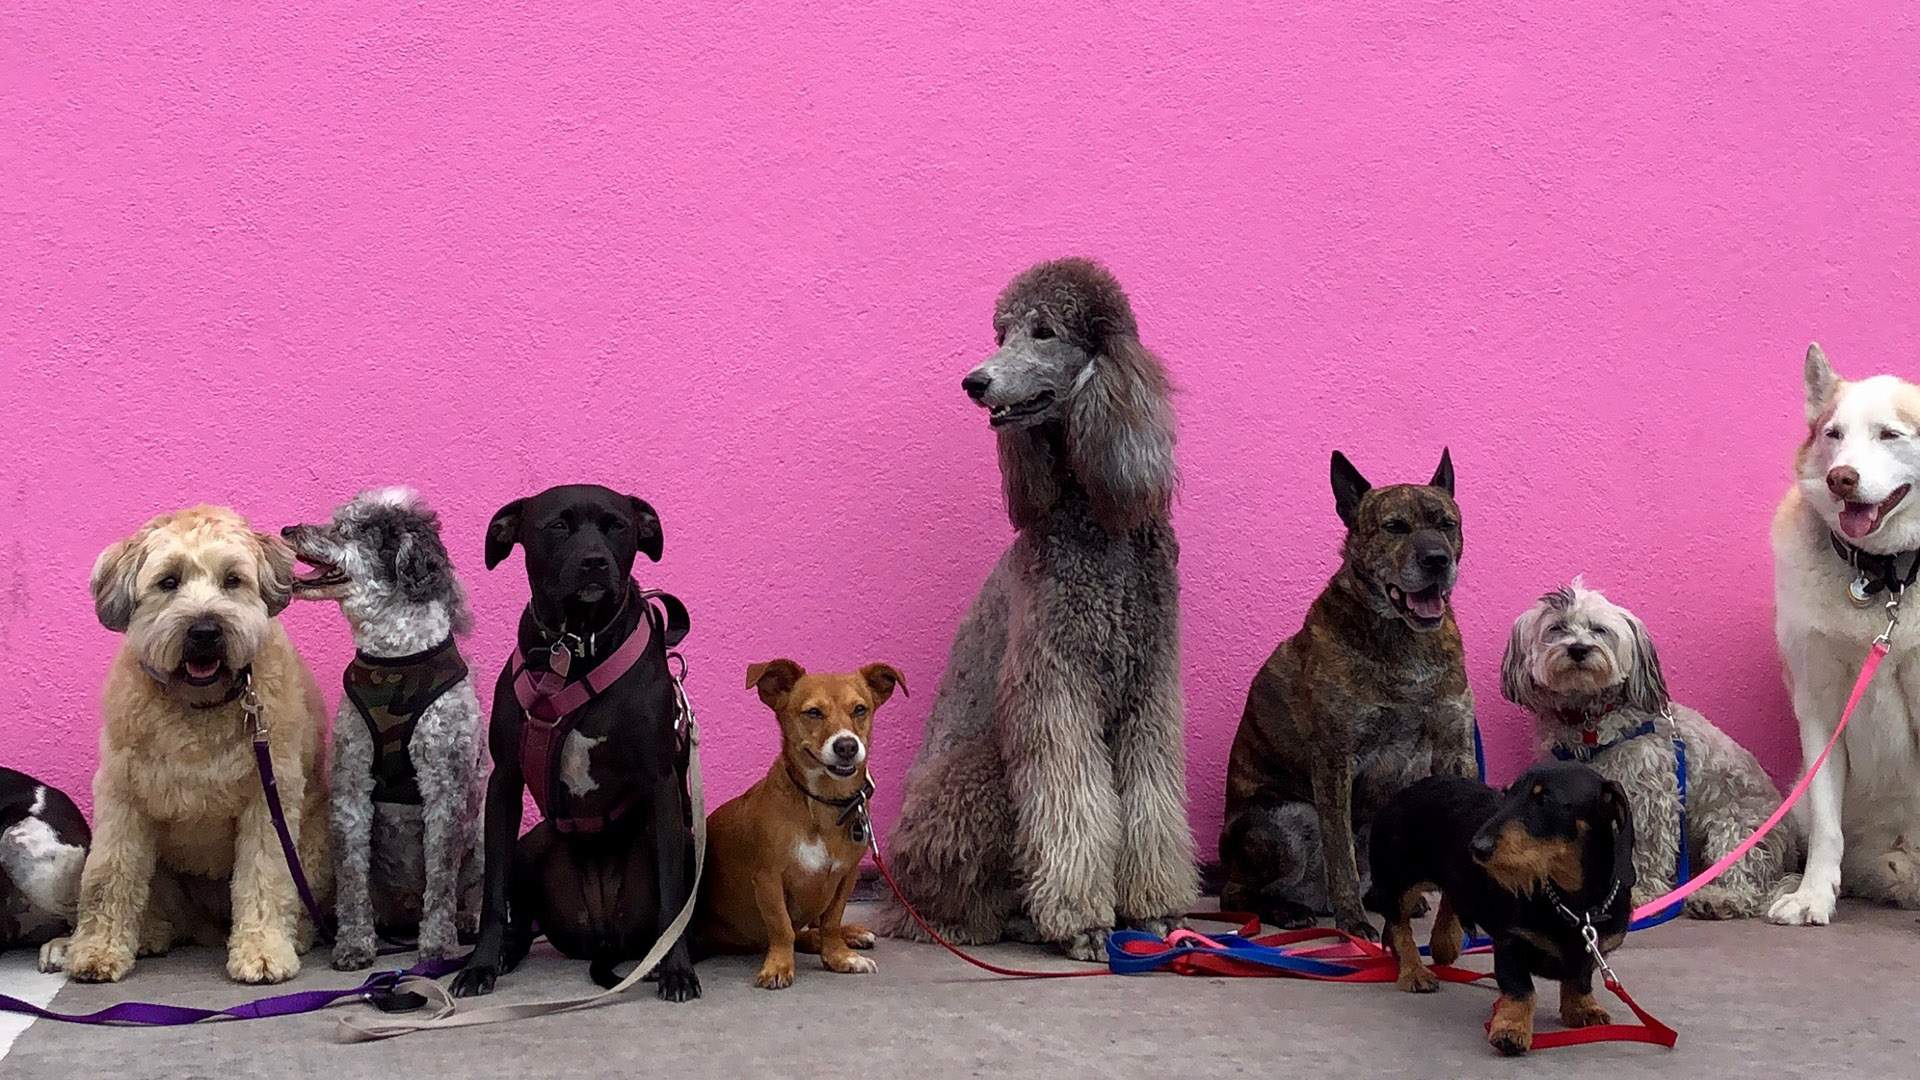 New York Is Getting an Adorable New Museum Dedicated to Dogs